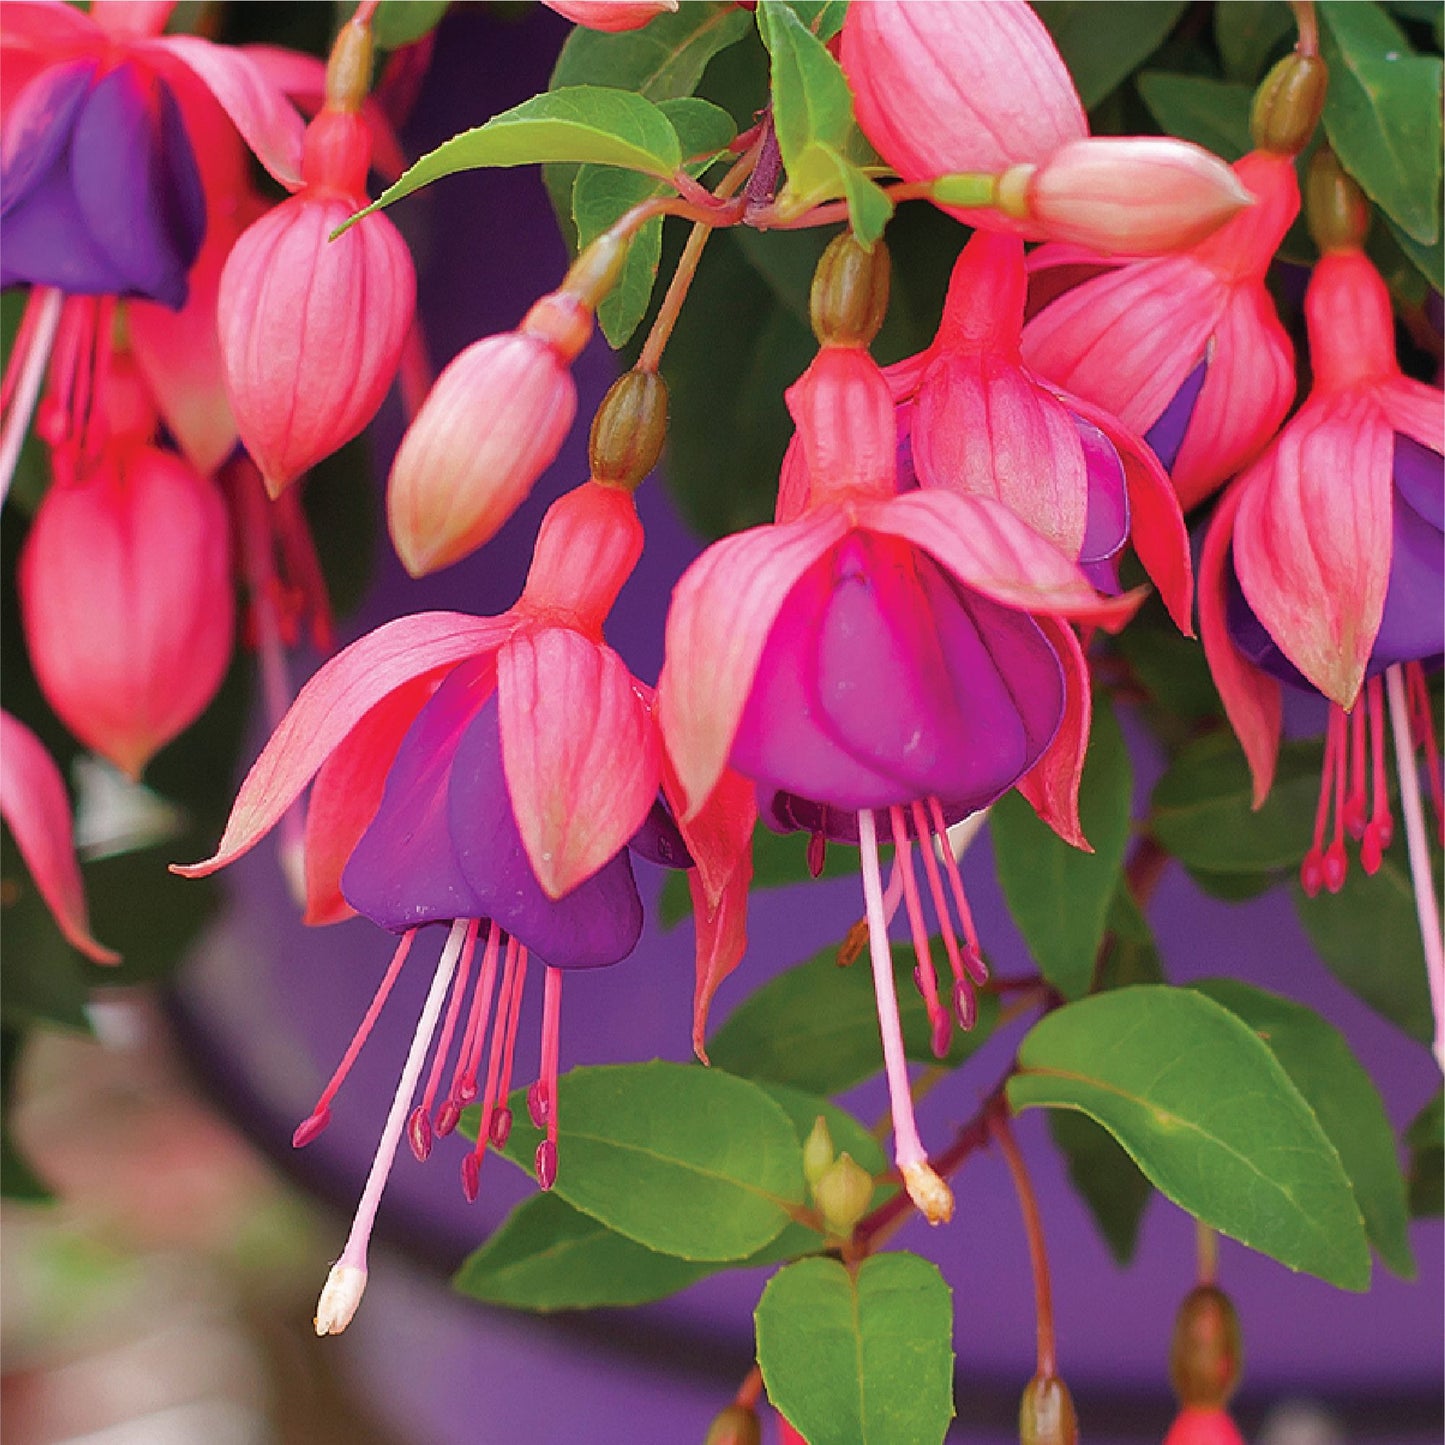 Fuchsia Bella Maria Rose Plantlings Plus Live Baby Plants 4in. Pot, 2-Pack